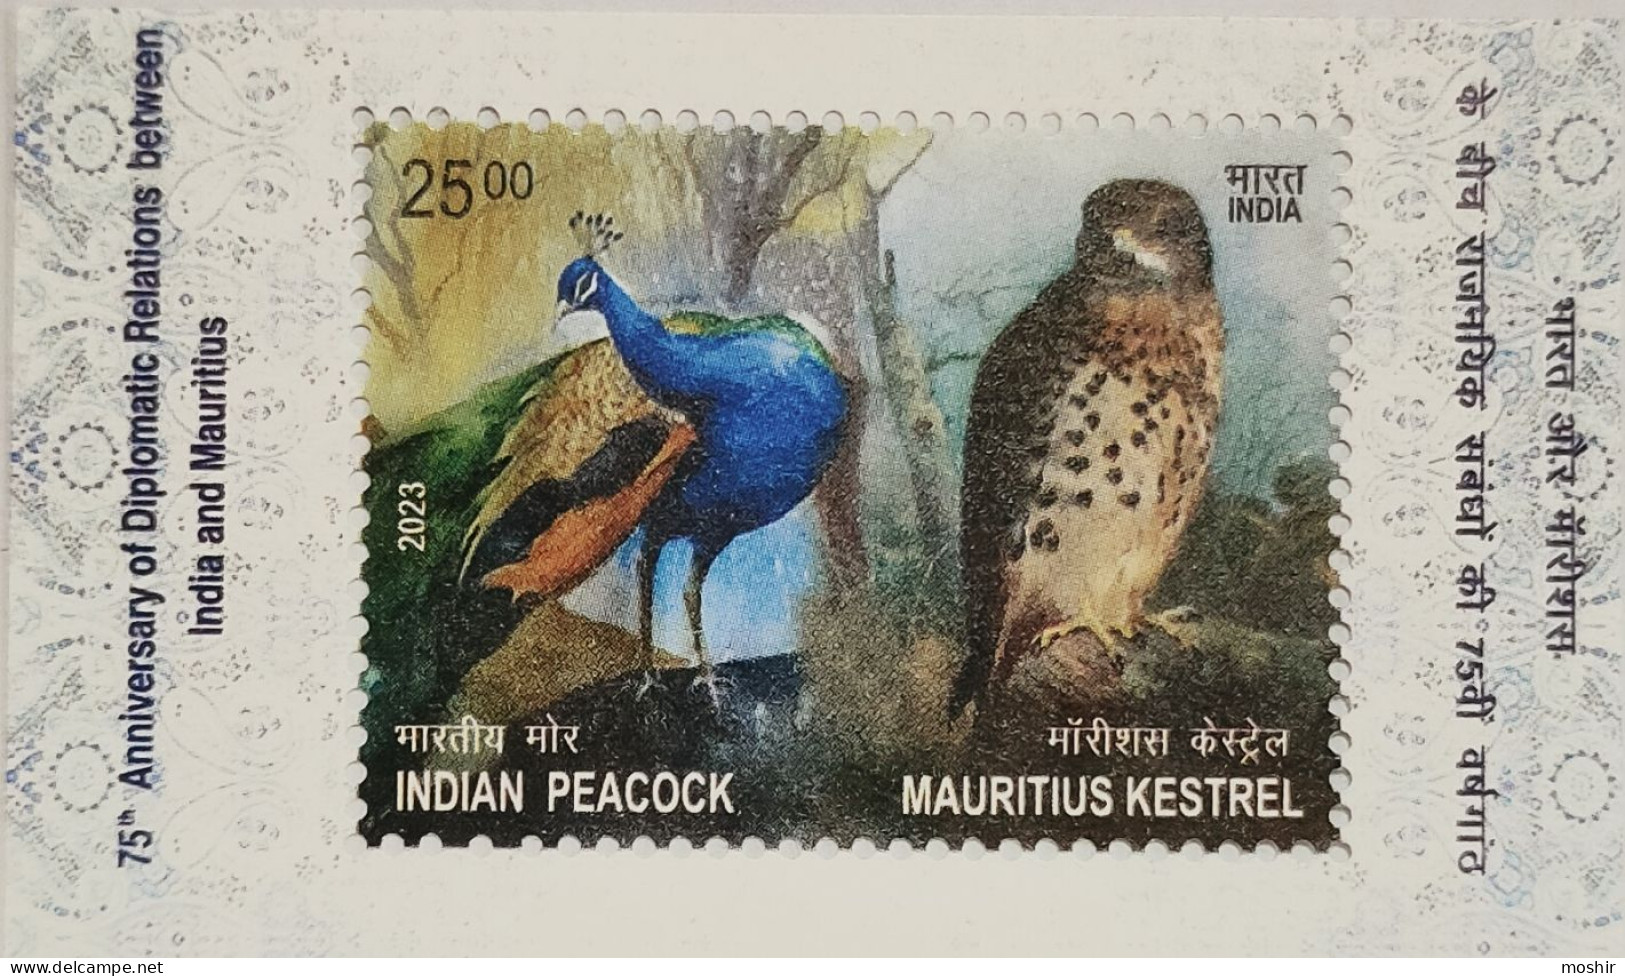 PEACOCK - KESTREL - INDIA-MAURITIUS JOINT ISSUE - Pavos Reales